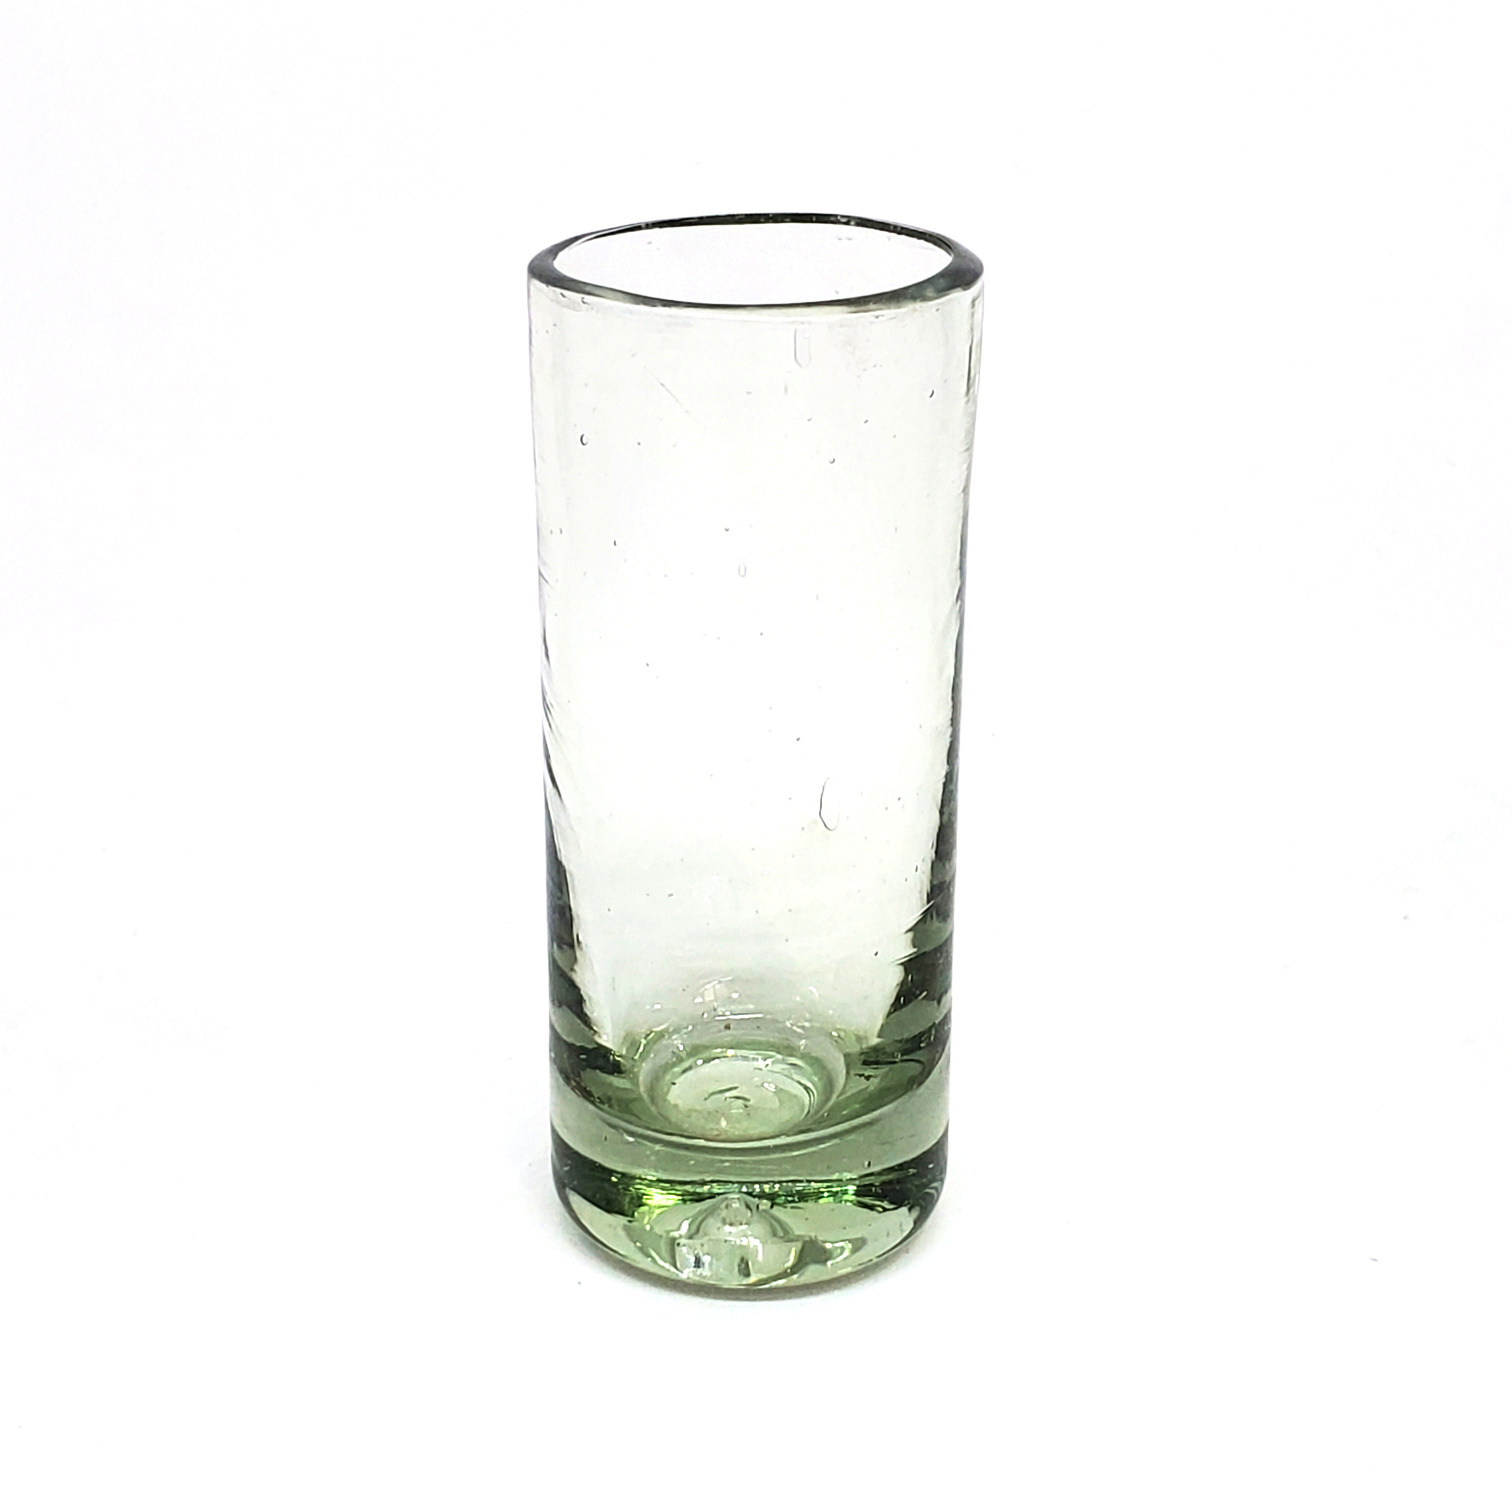 Wholesale Clear Glassware / Clear 2 oz Tequila Shot Glasses  / Sip your favourite tequila or mezcal with these iconic clear handcrafted shot glasses.